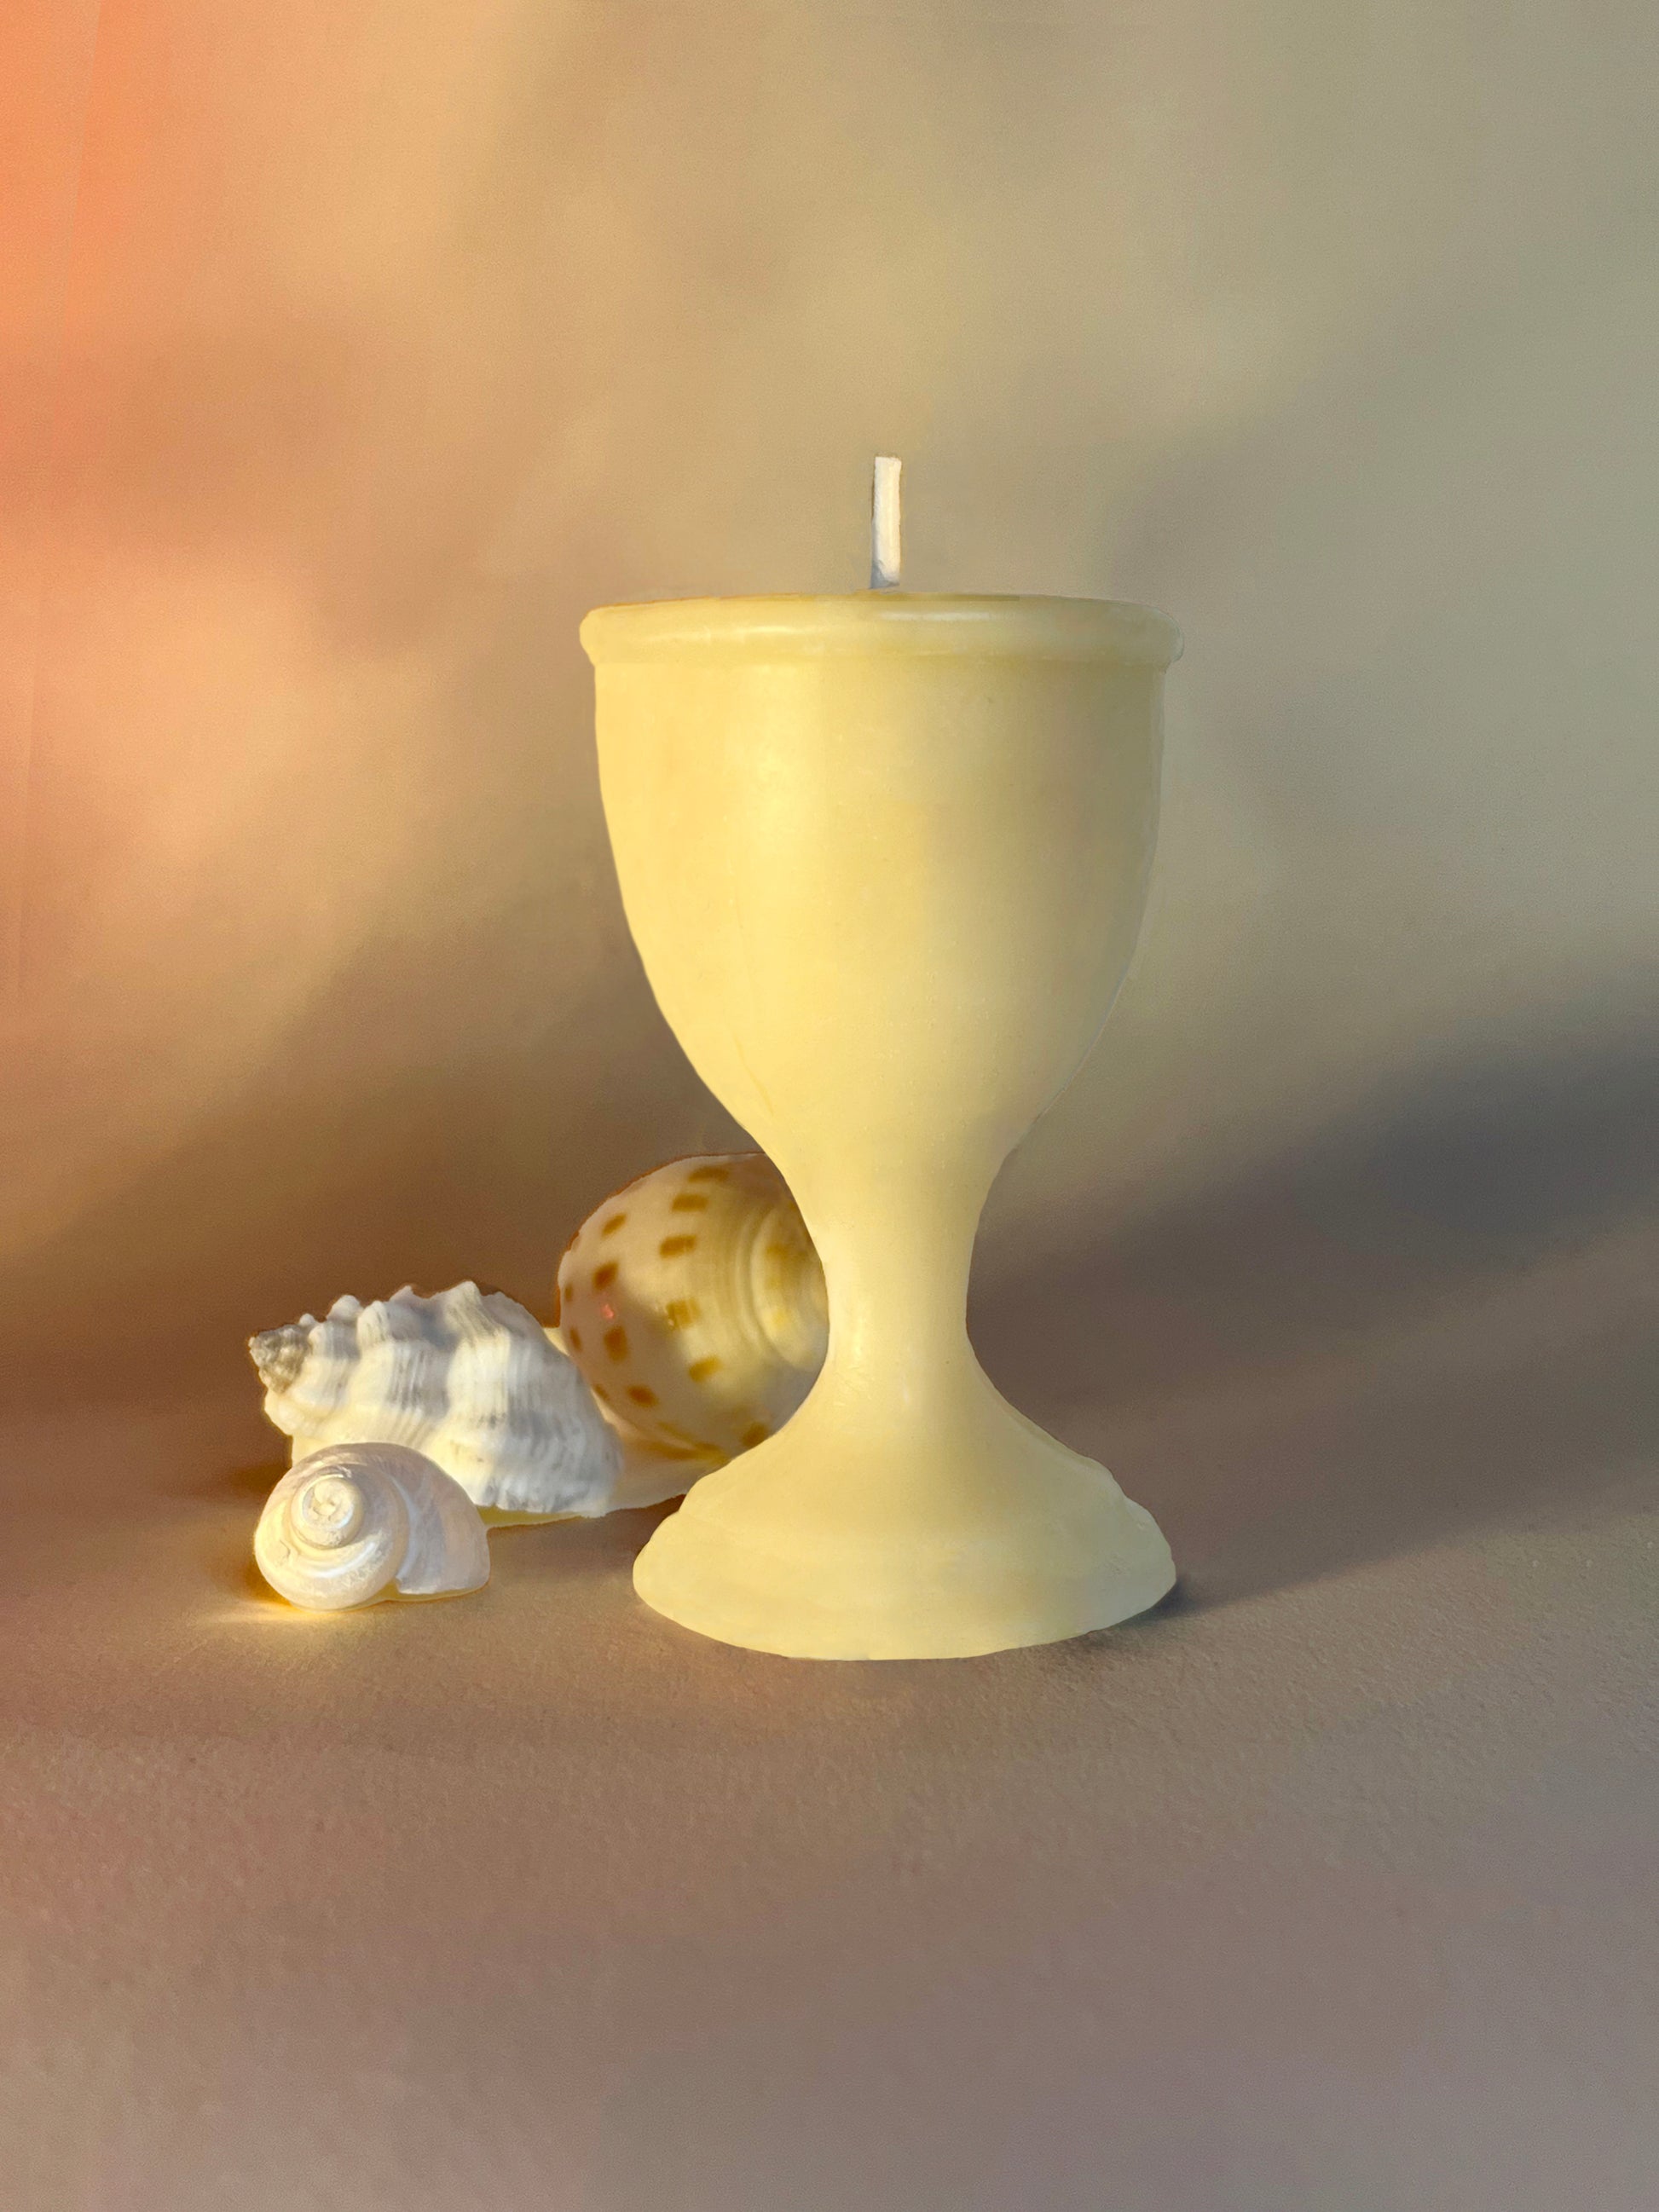 A 100% Beeswax hand-poured candle in the shape of a cup. This candle is eco-friendly and artisanal. 